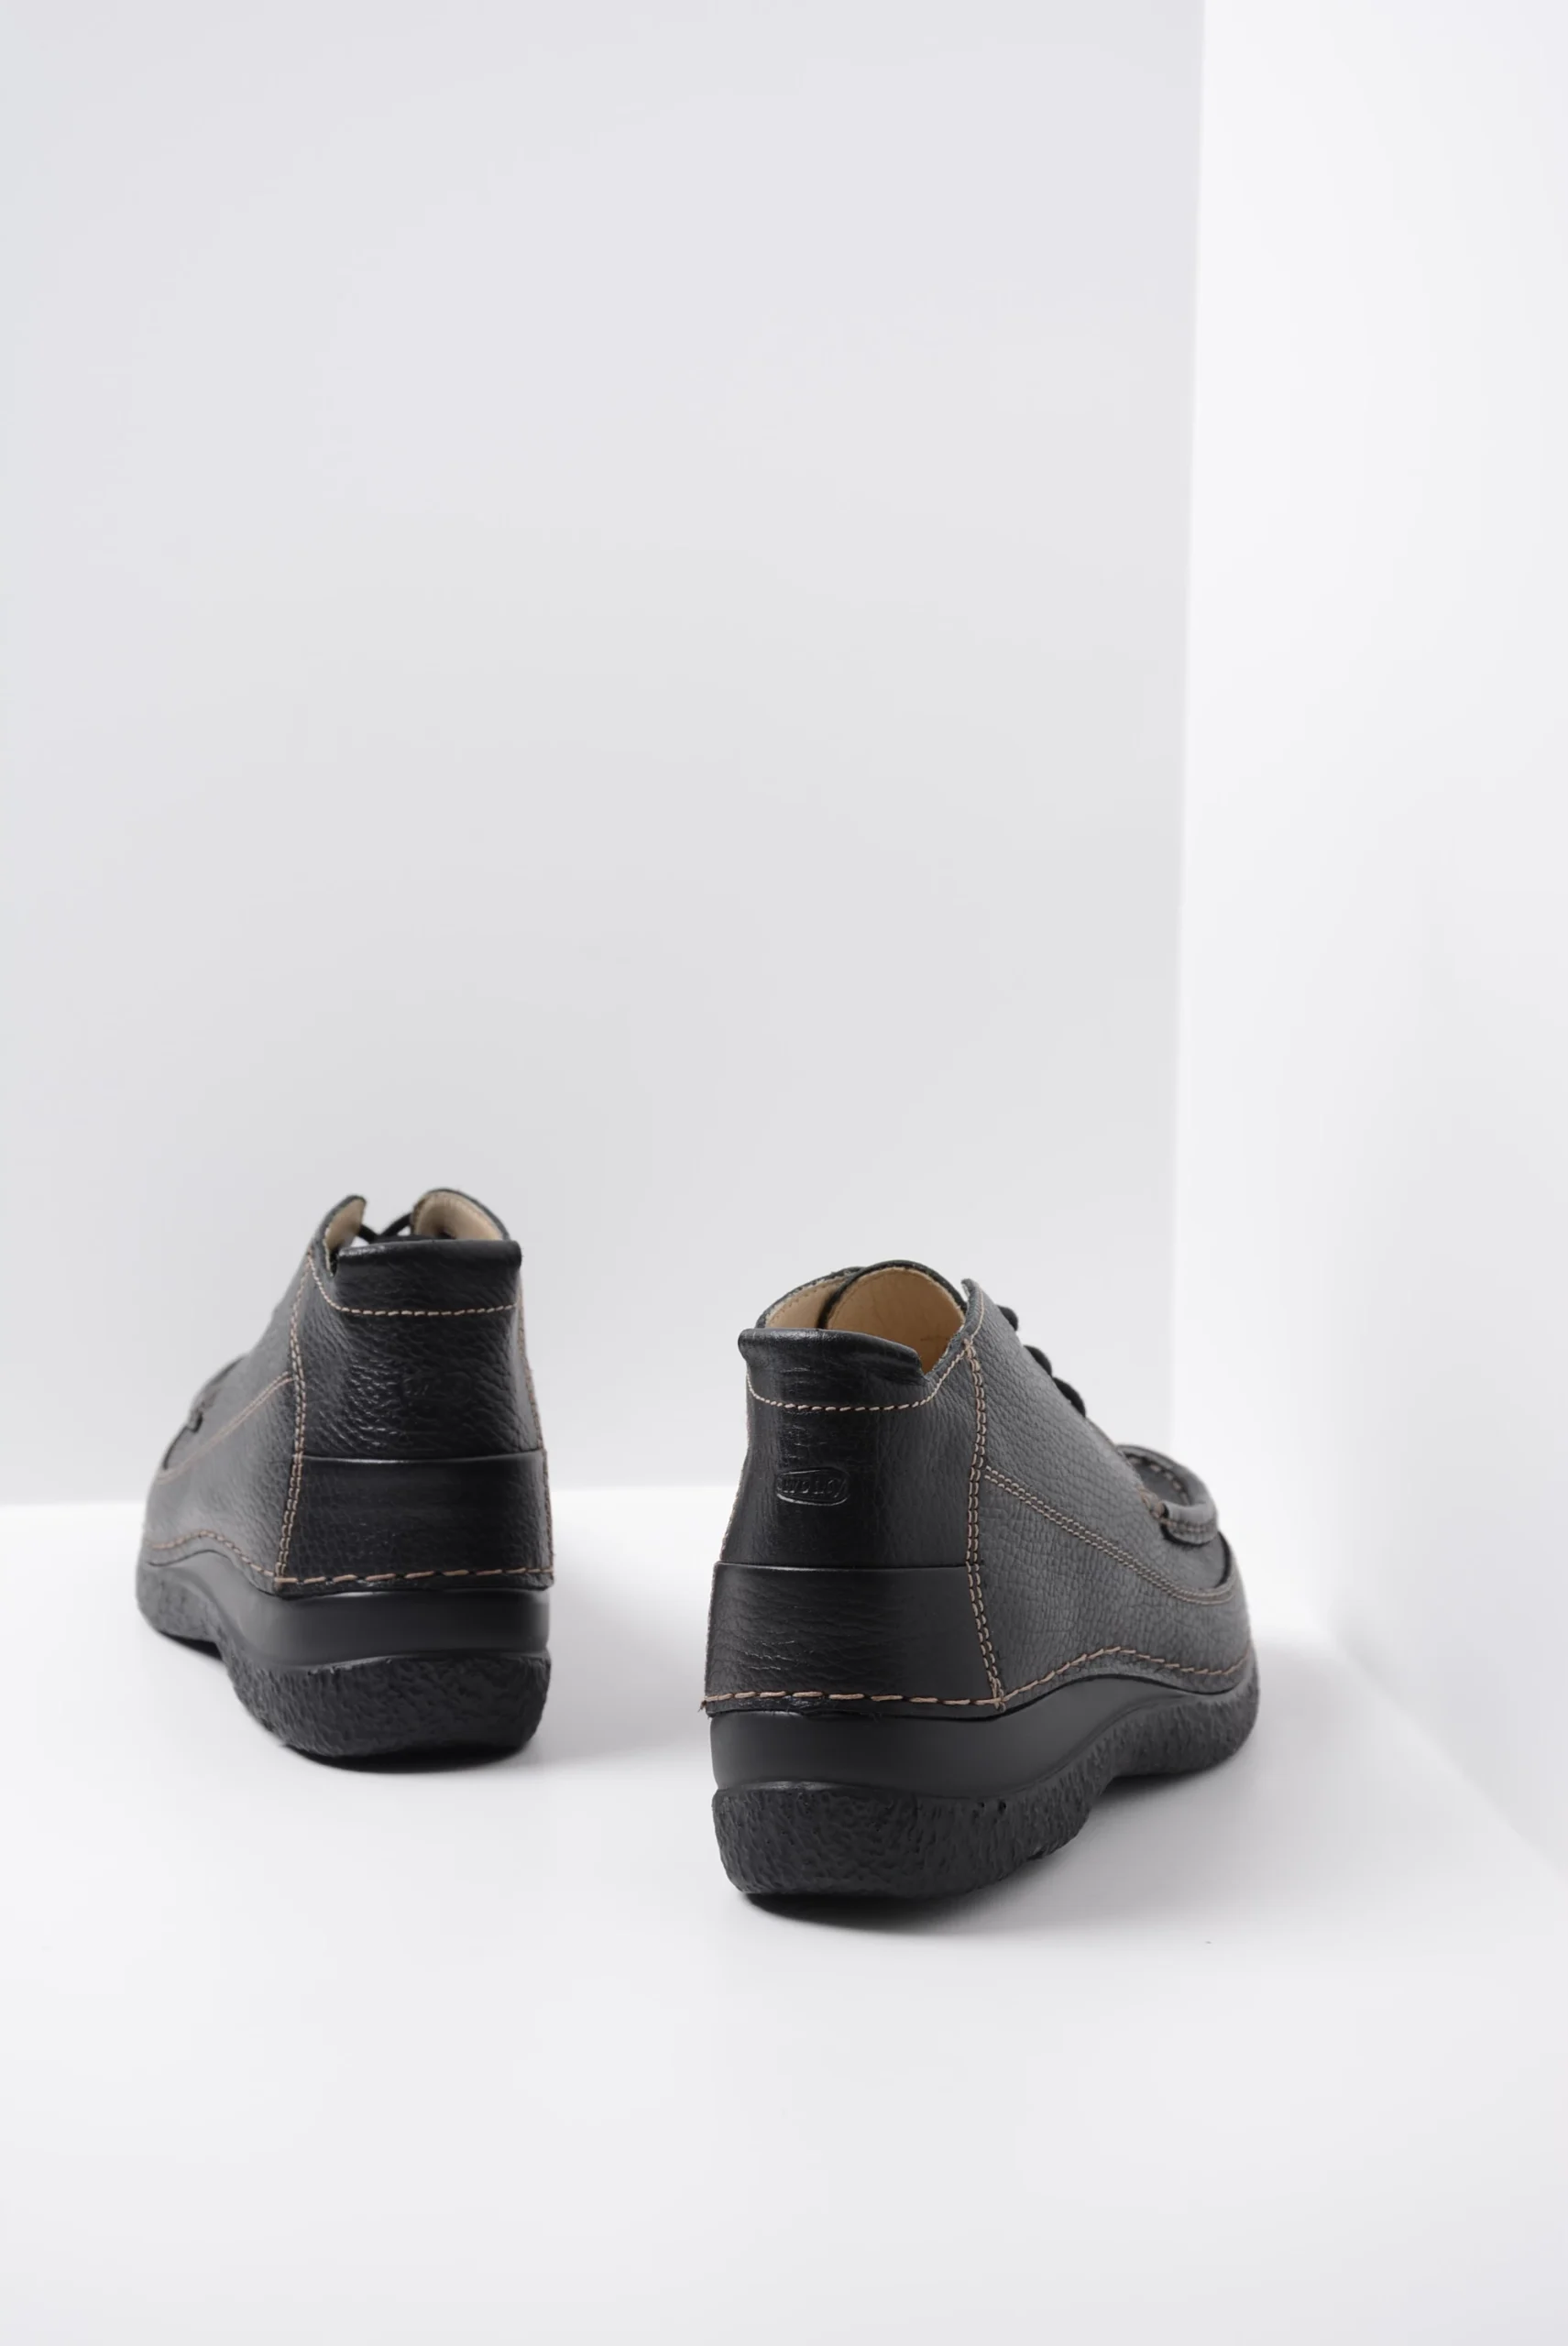 wolky comfort shoes 06200 roll moc 70000 black leather back